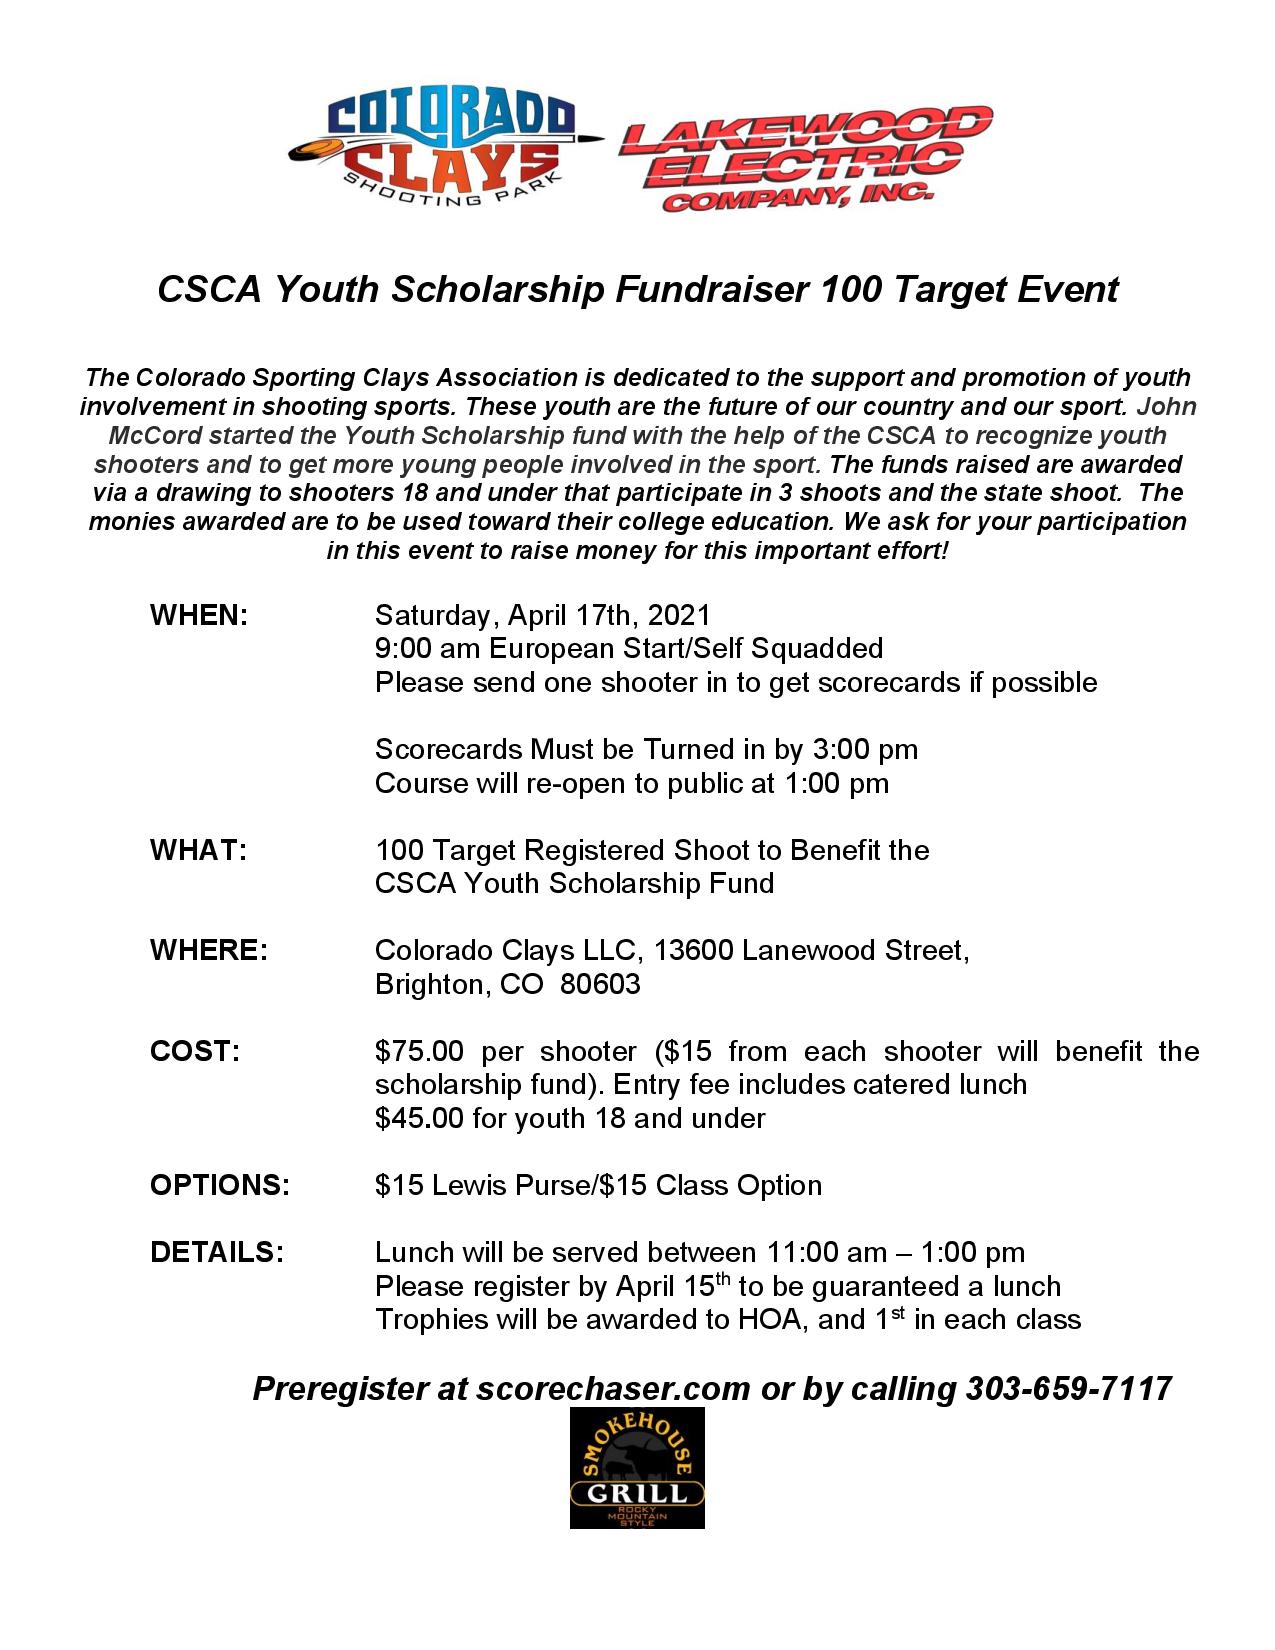 Cancelled - CSCA Youth Scholarship Fundraiser 100 Target Event